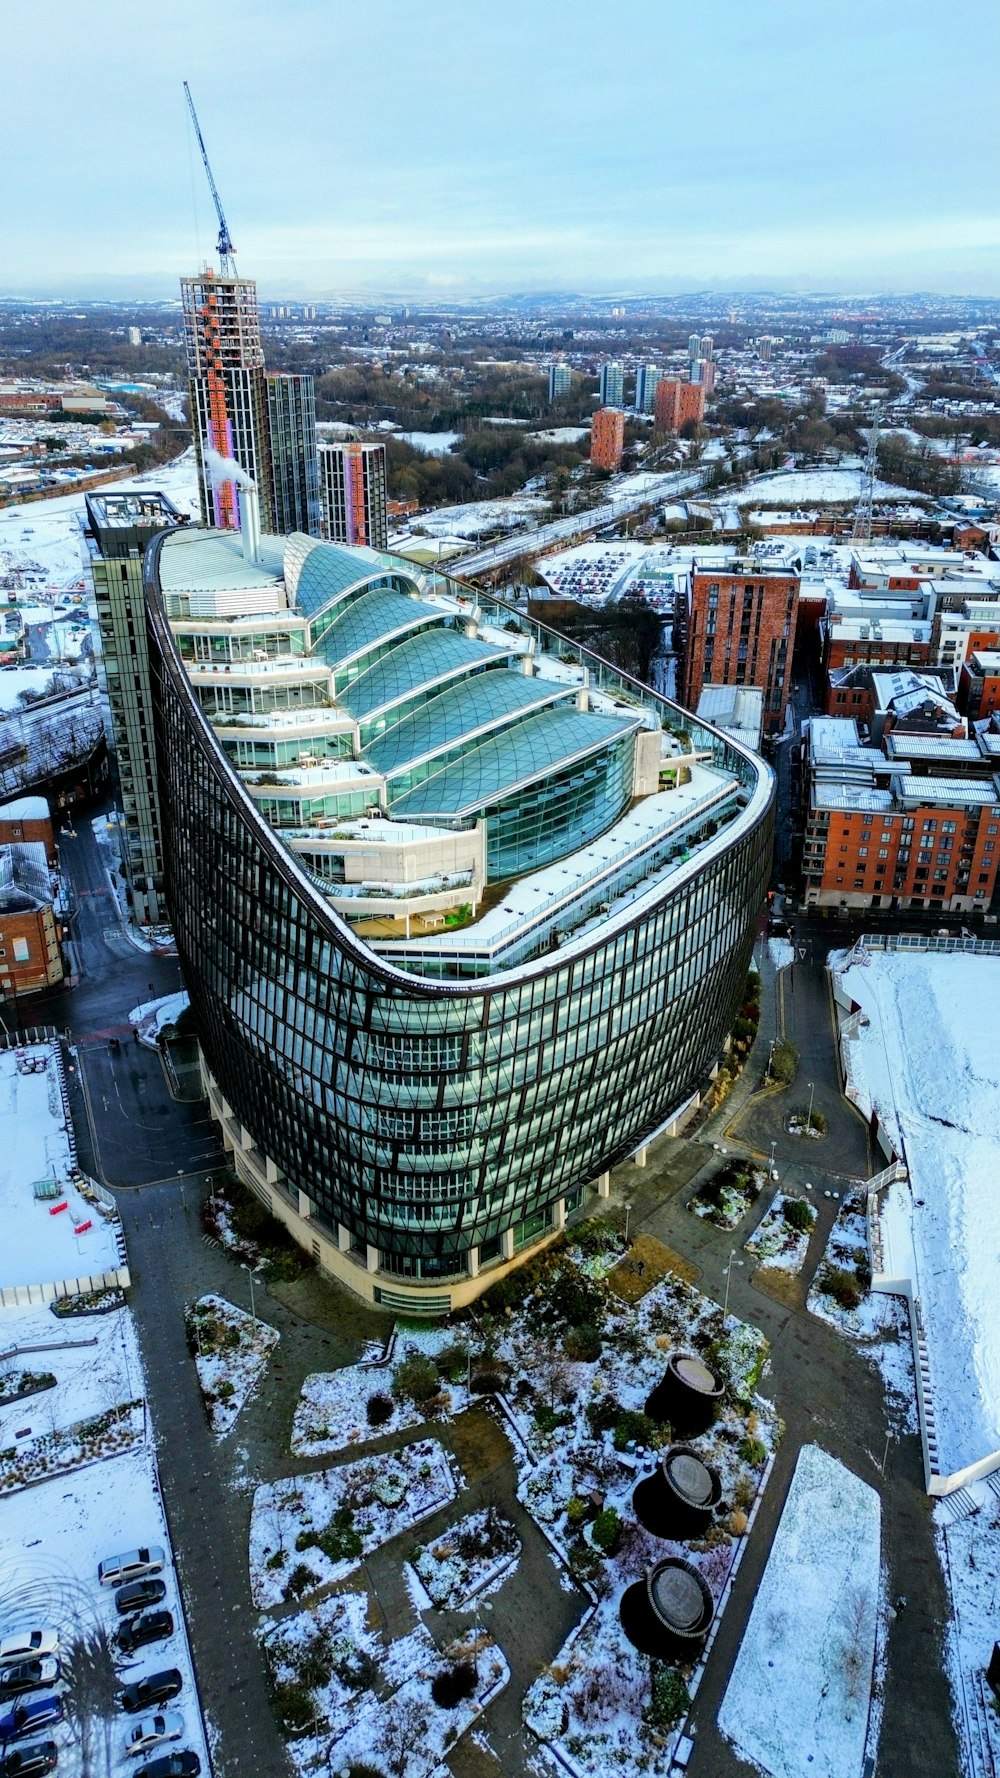 an aerial view of a building in a city